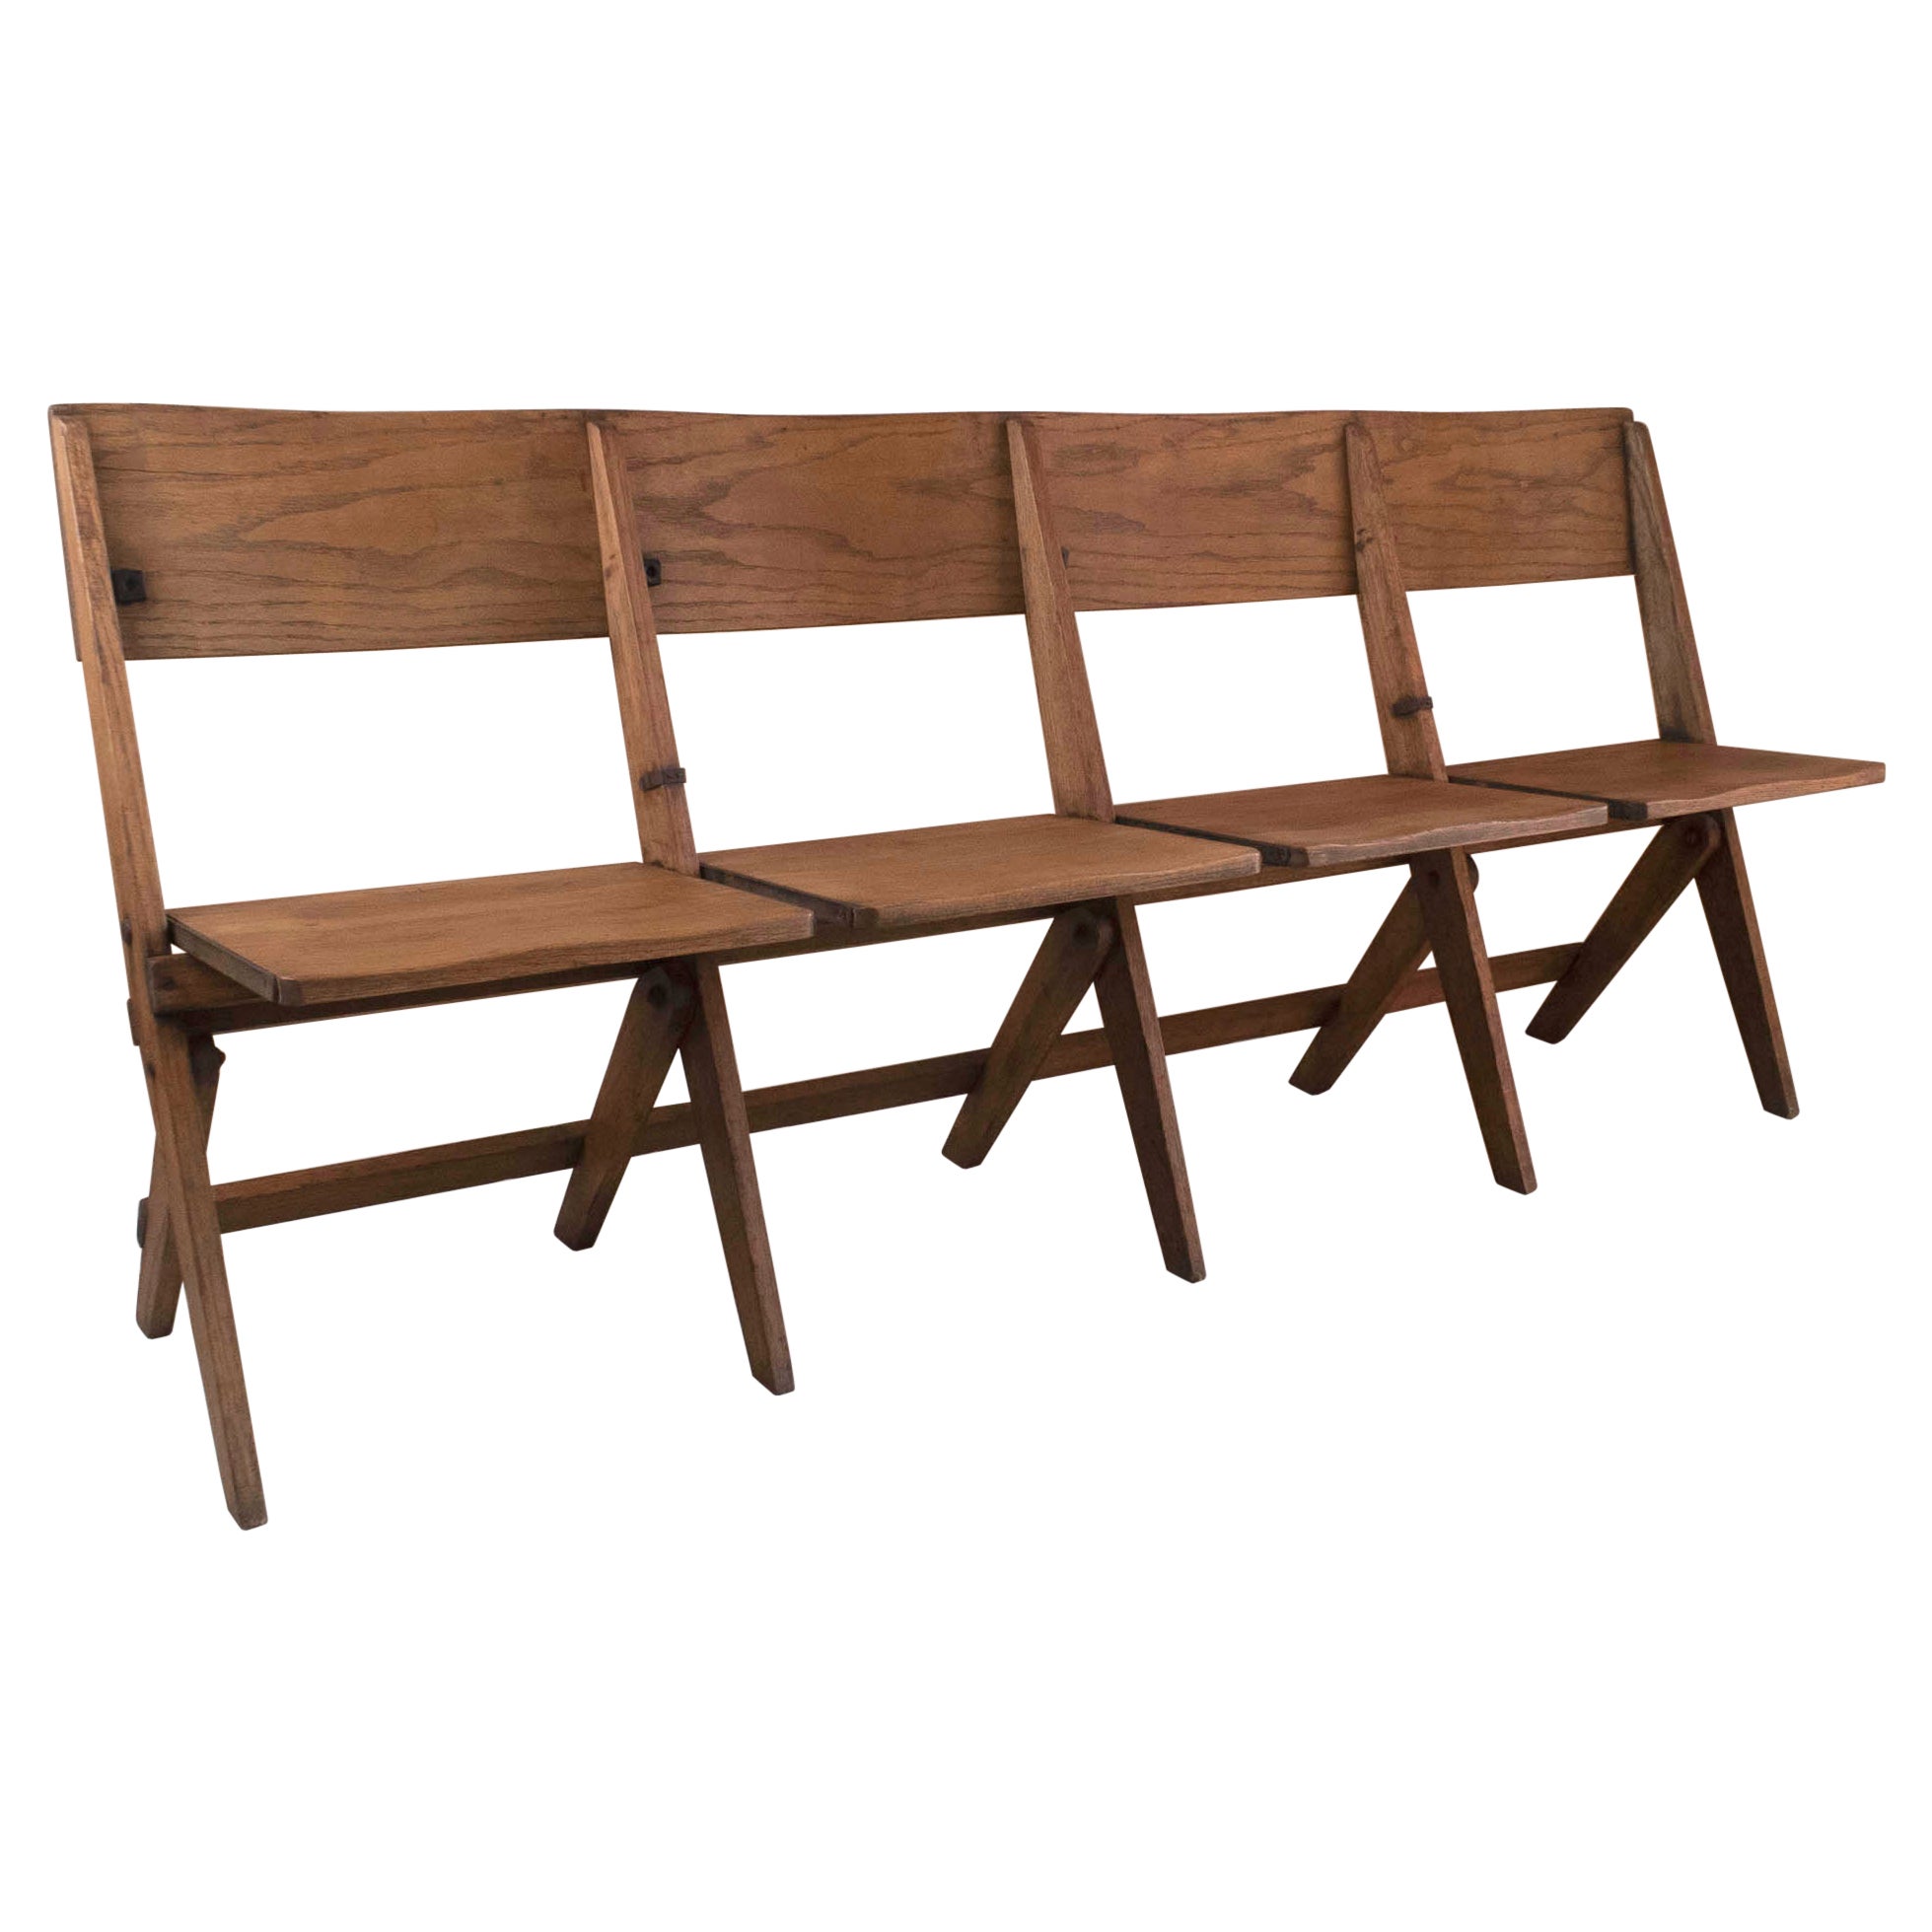 Vintage Campaign Folding Oak 4 Seater Bench. English C.1920 For Sale